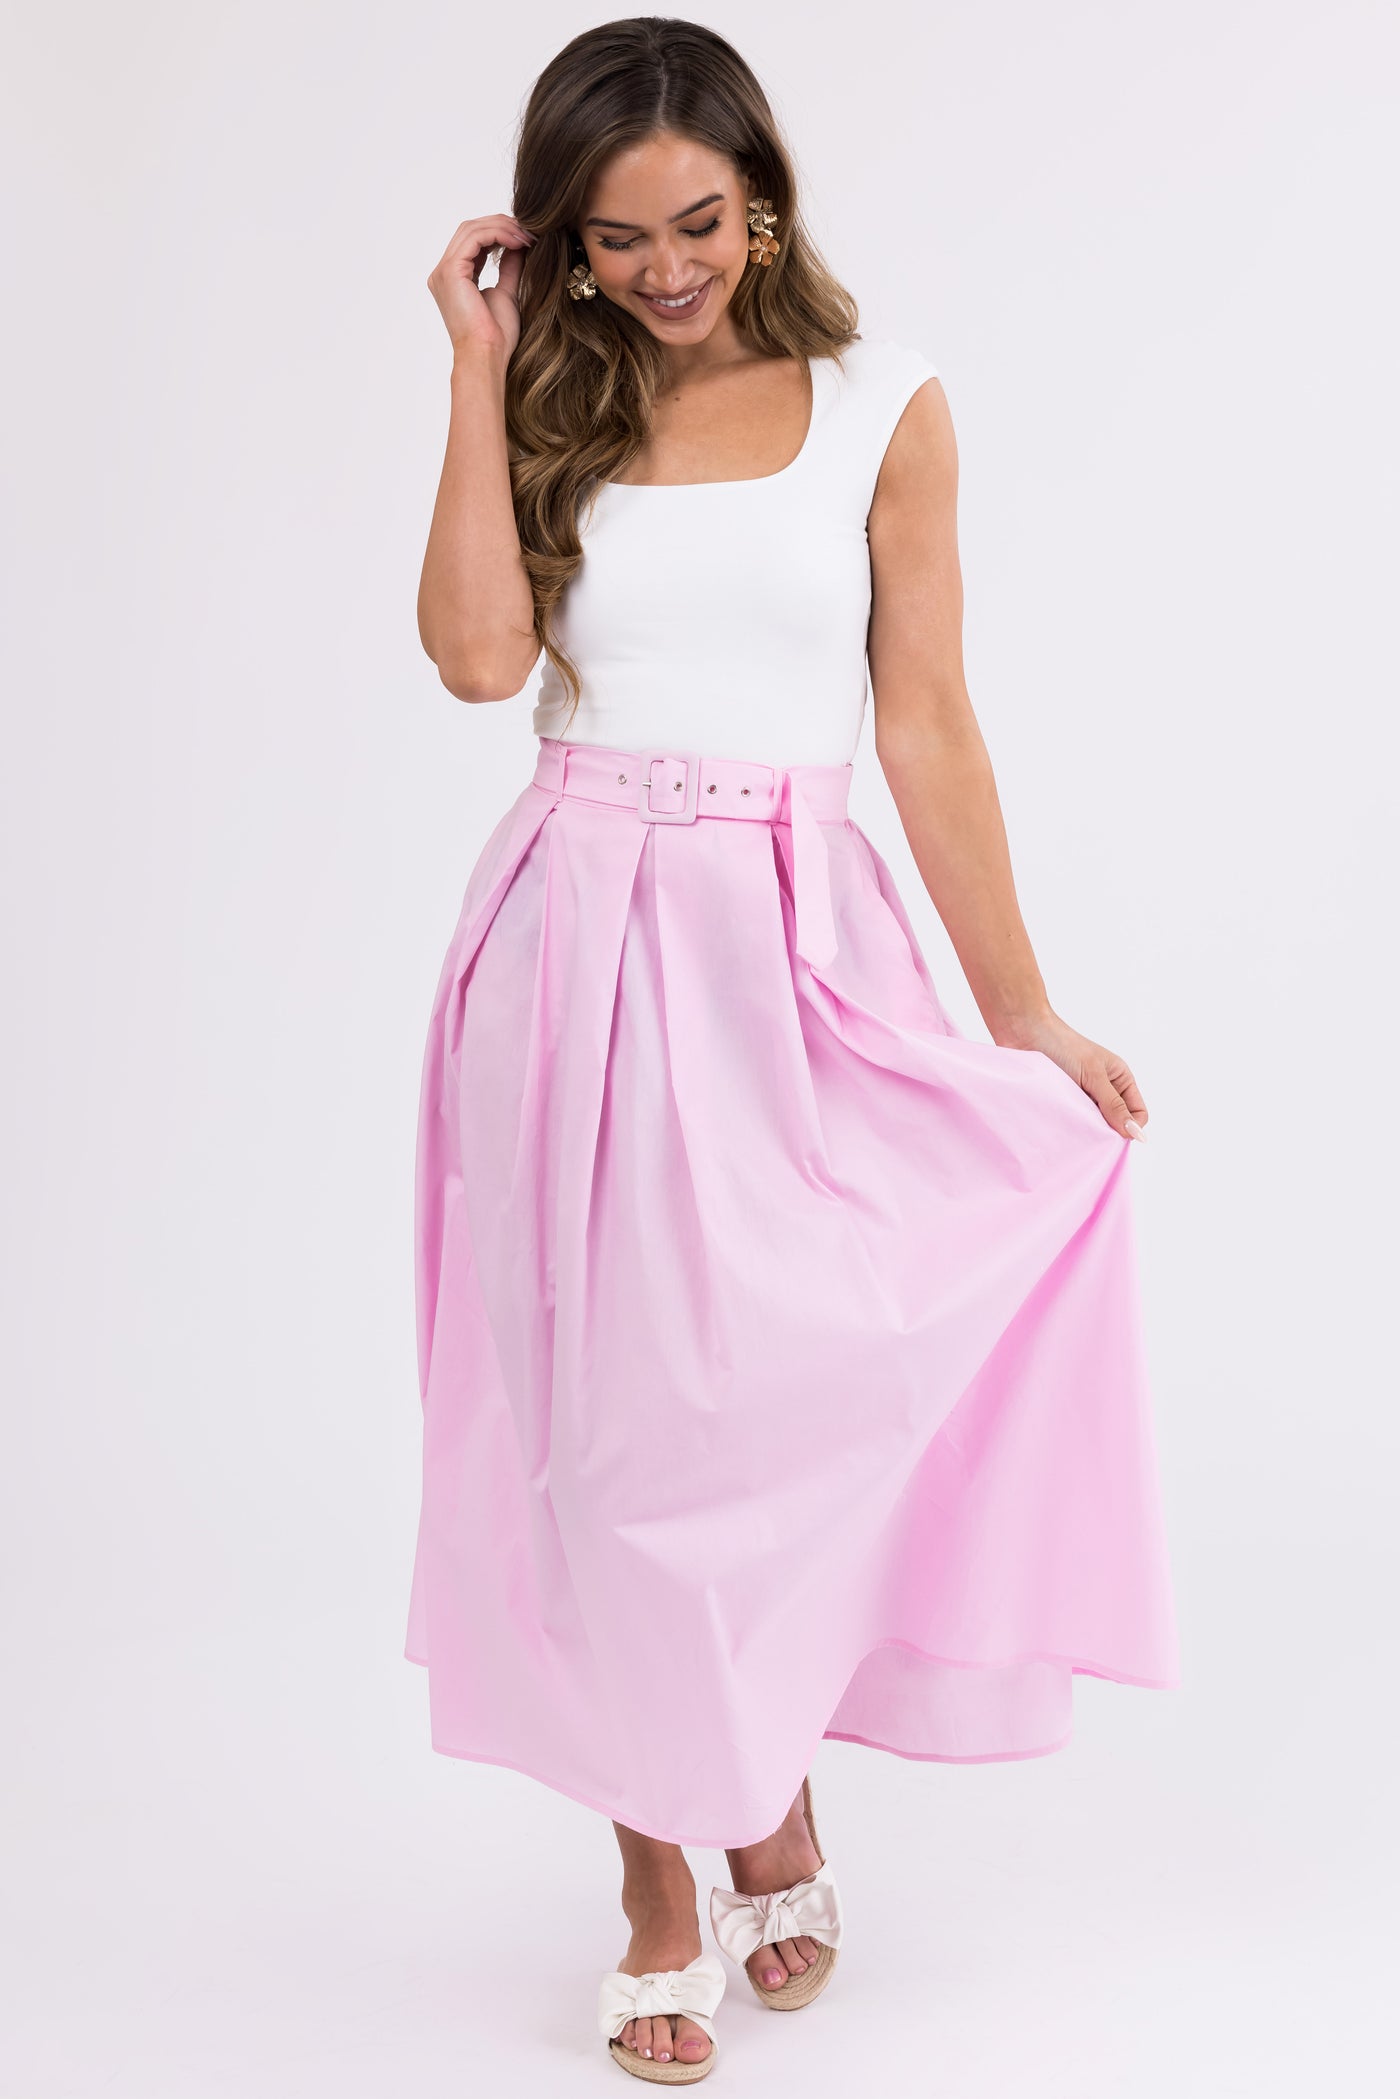 Carnation Pink Belted Woven A Line Maxi Skirt